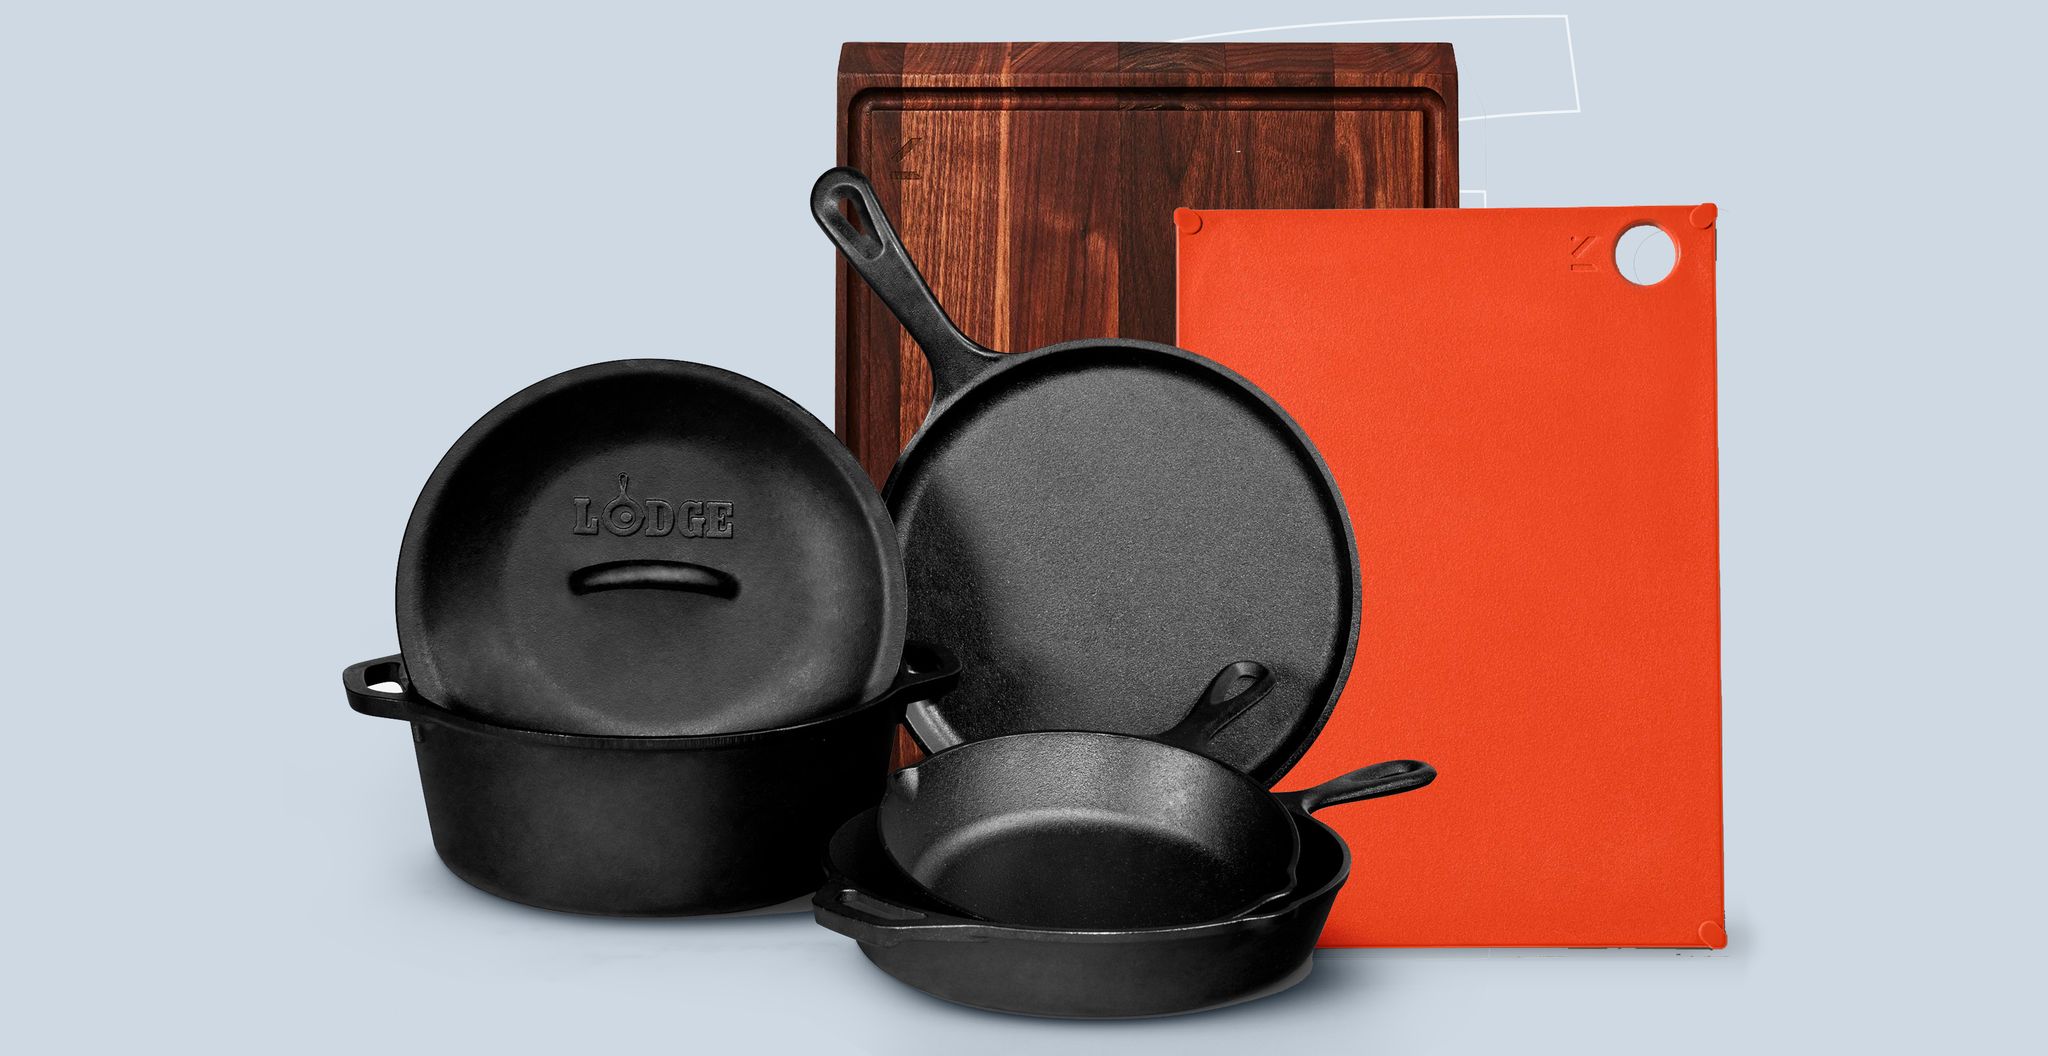 The 3 Best Cookware Sets of 2024